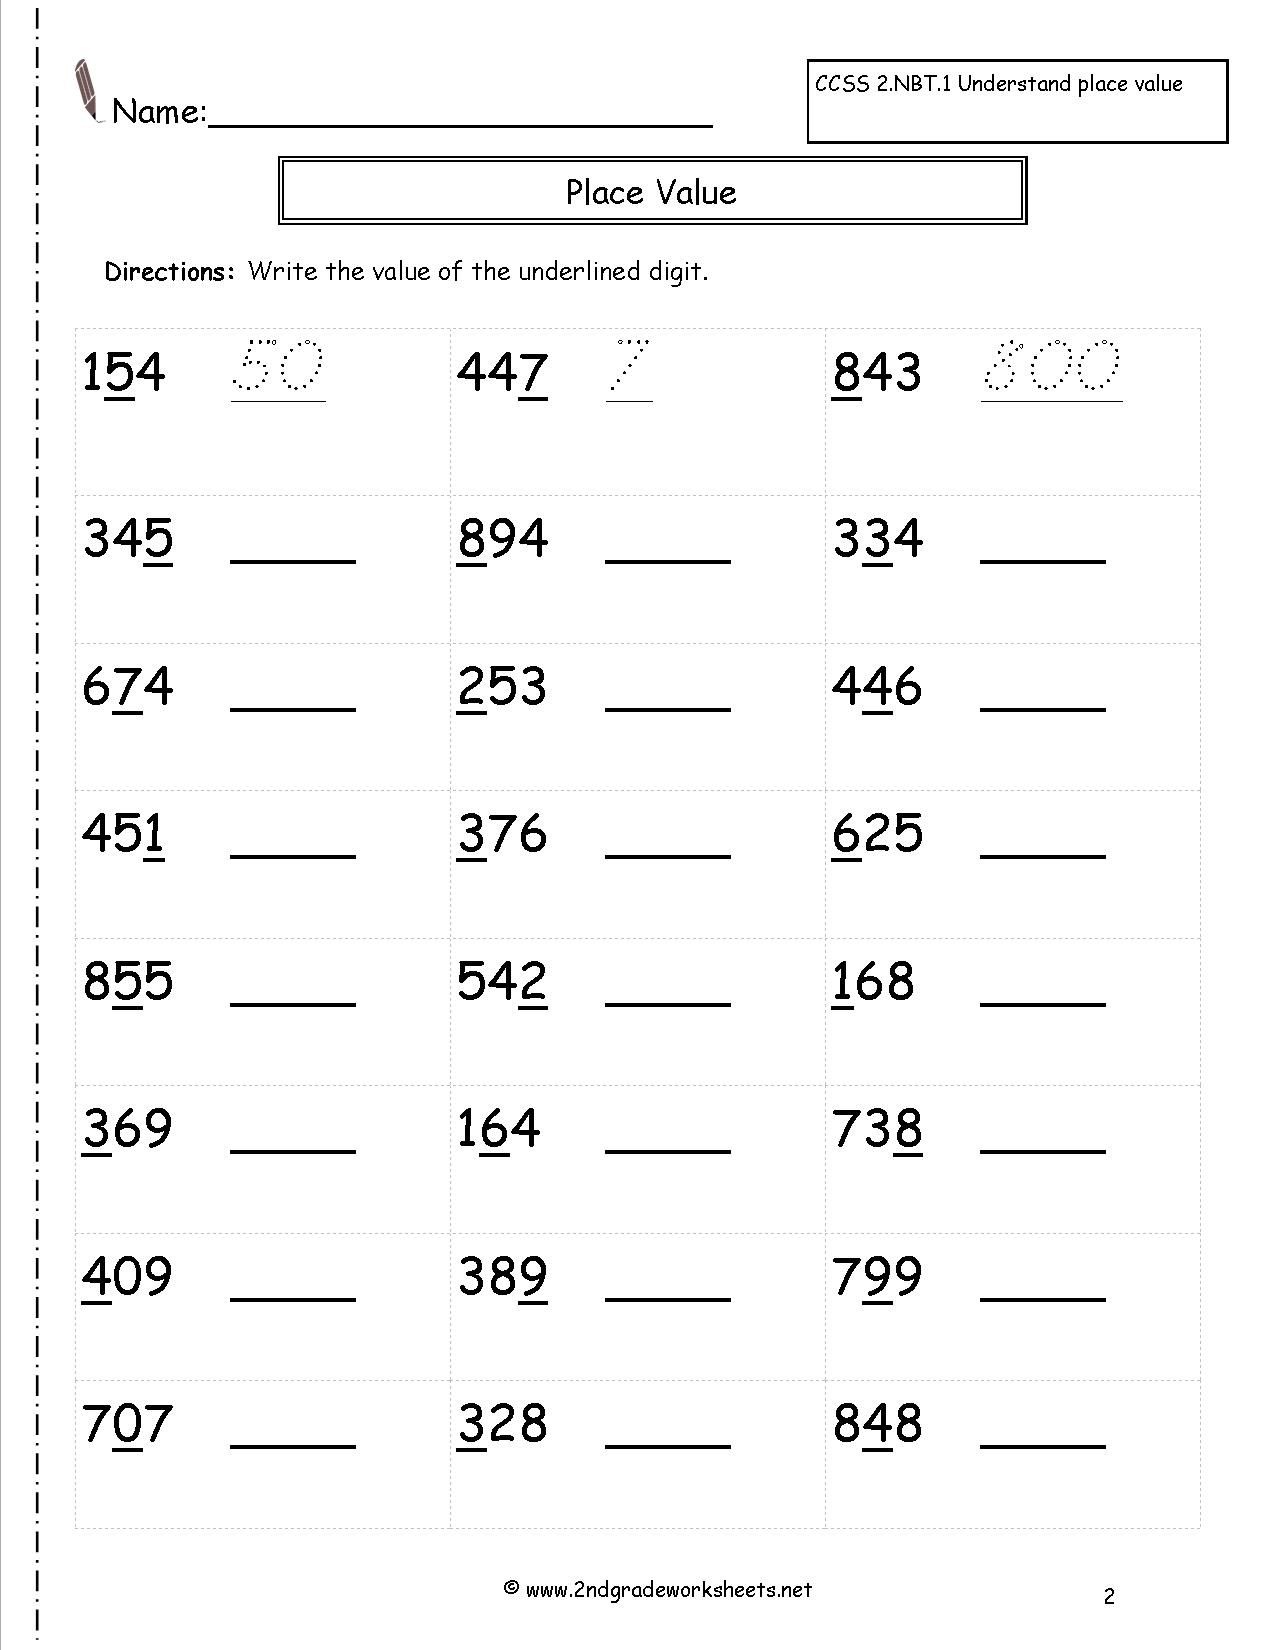 Place Value Worksheets Second Grade | Place Value Worksheet | Places - Free Printable Place Value Worksheets